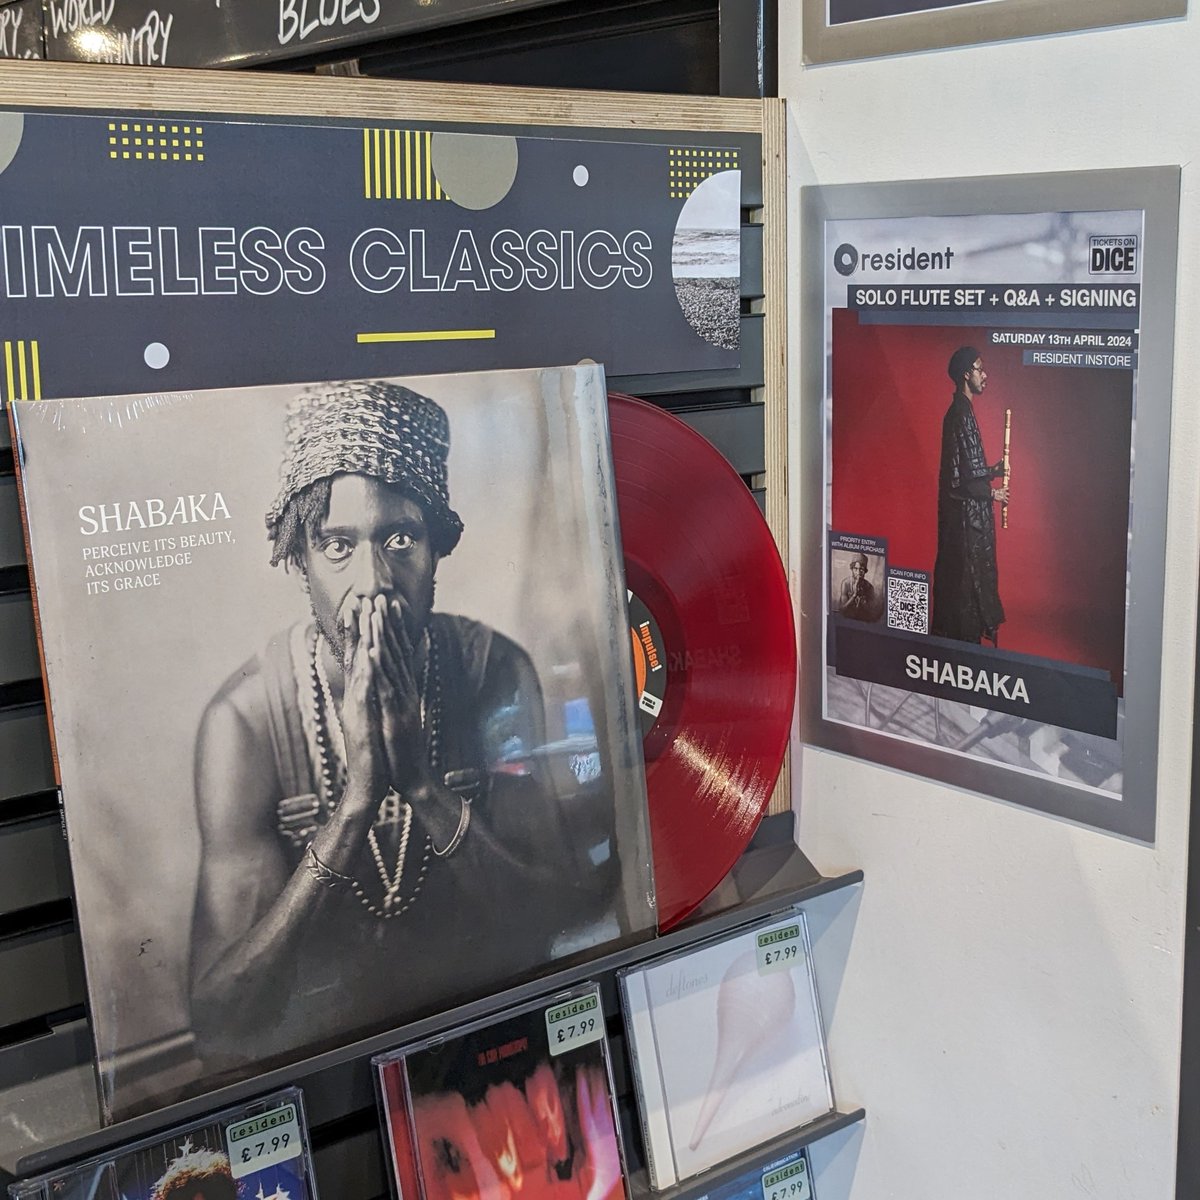 All is calm in the Resident office today after listening to @shabakah's absolutely beautiful album🎶 If you want a serene Saturday evening and to ask questions to a jazz icon, grab an album below for entry to his instore! link.dice.fm/z6f0e7d2ba08